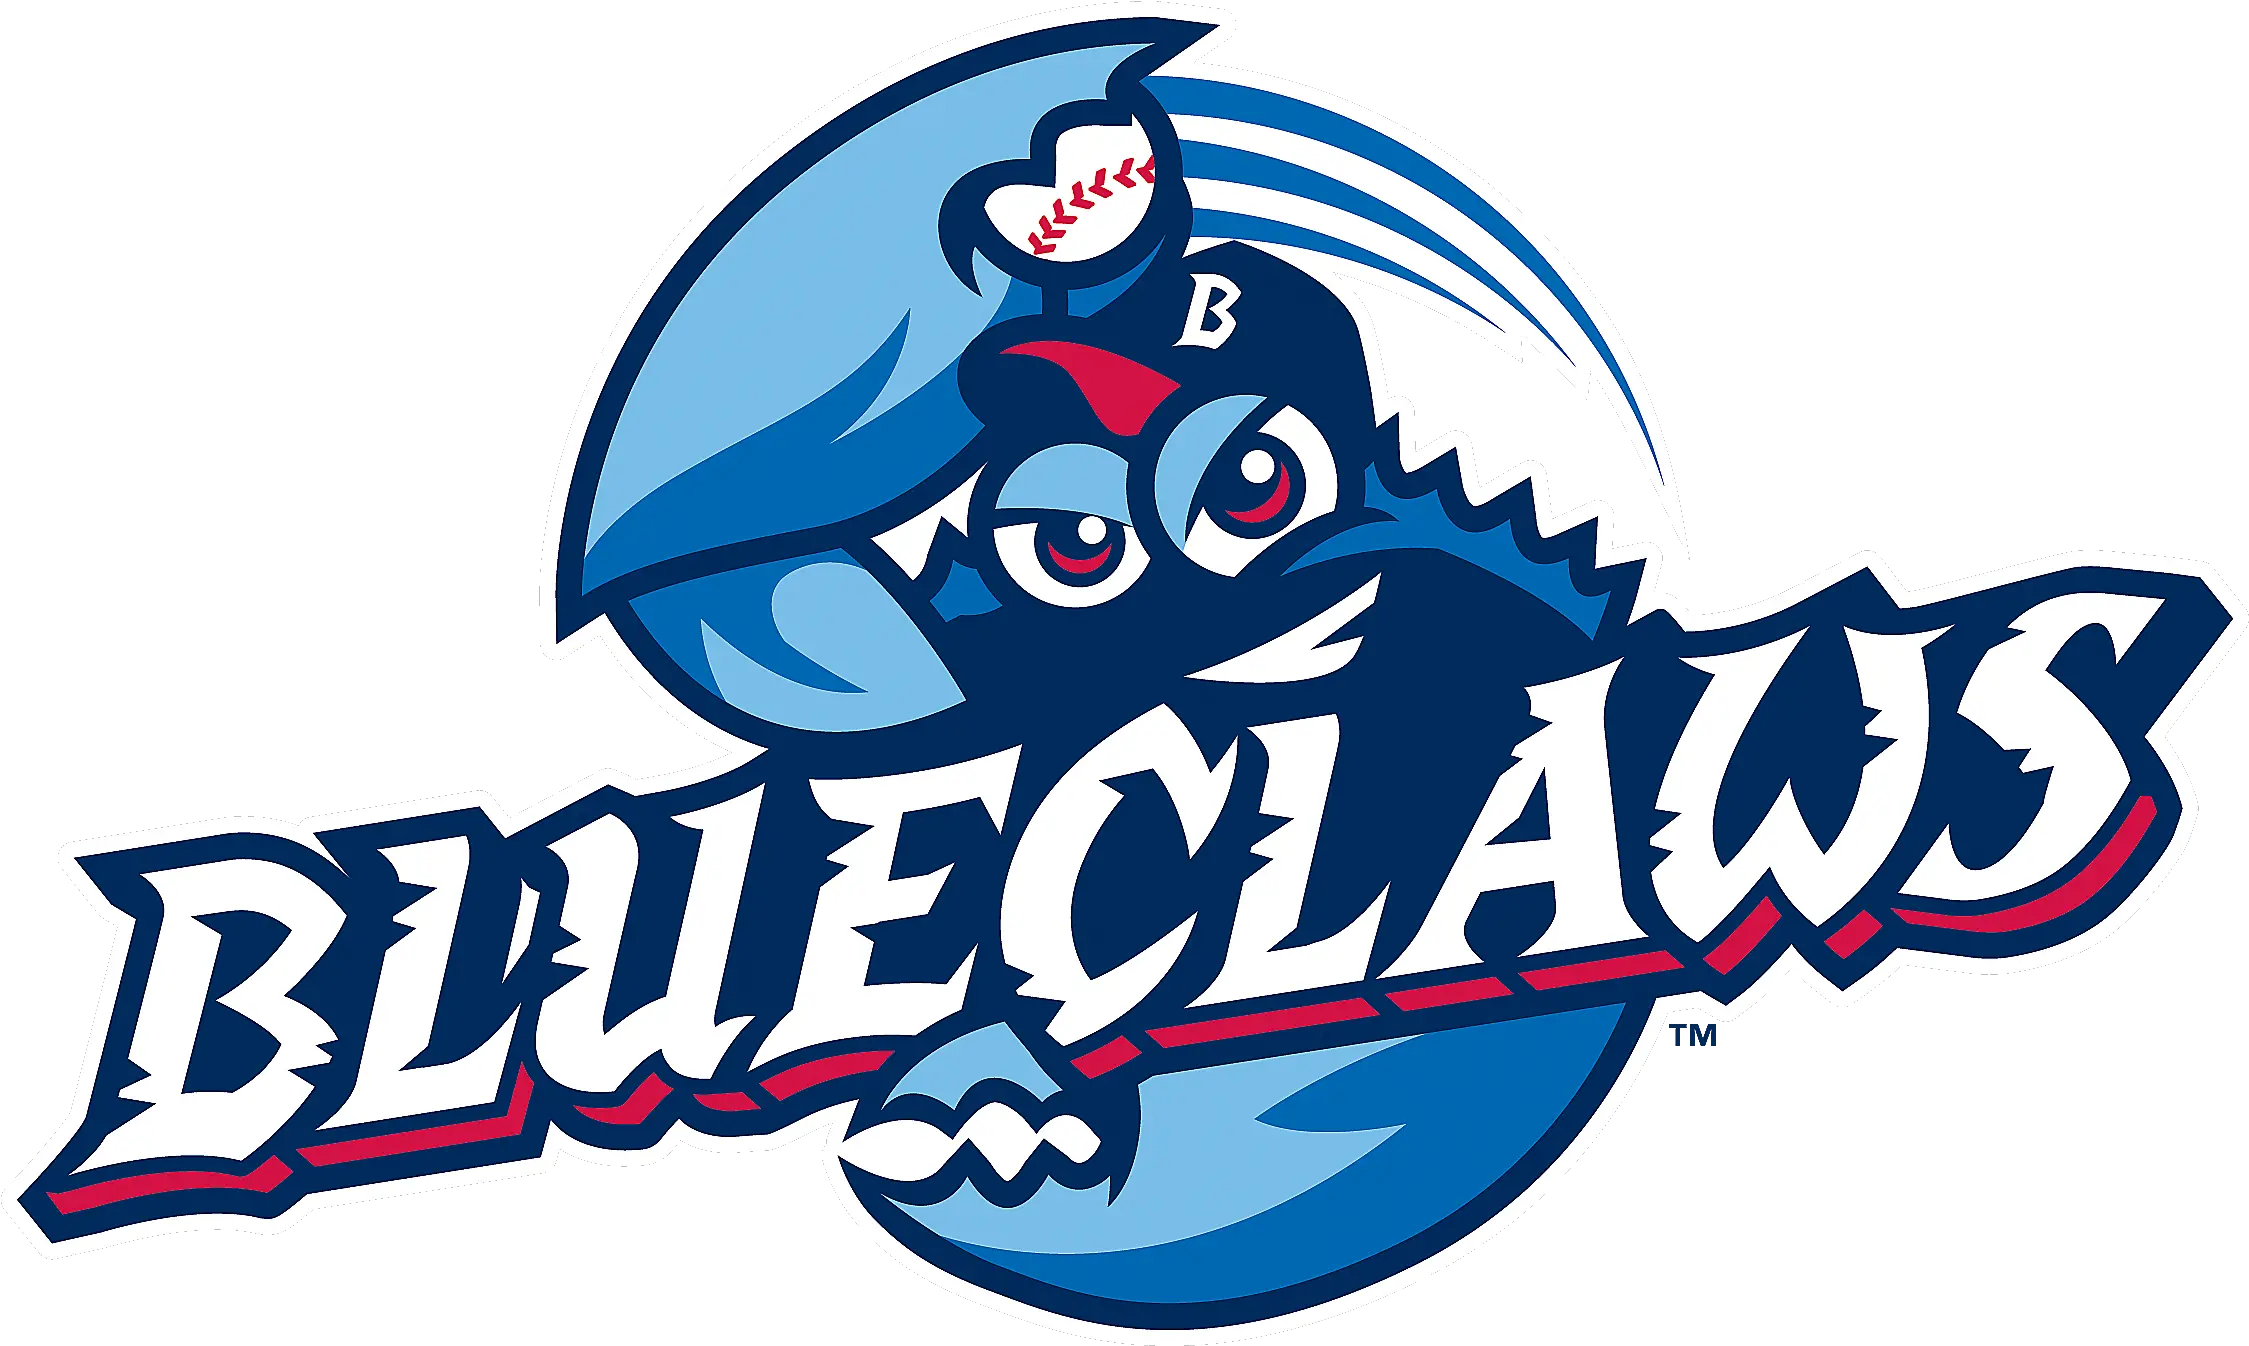 Celebrate U0027virtual Opening Nightu0027 With The Blueclaws Png Warner Family Entertainment Logo